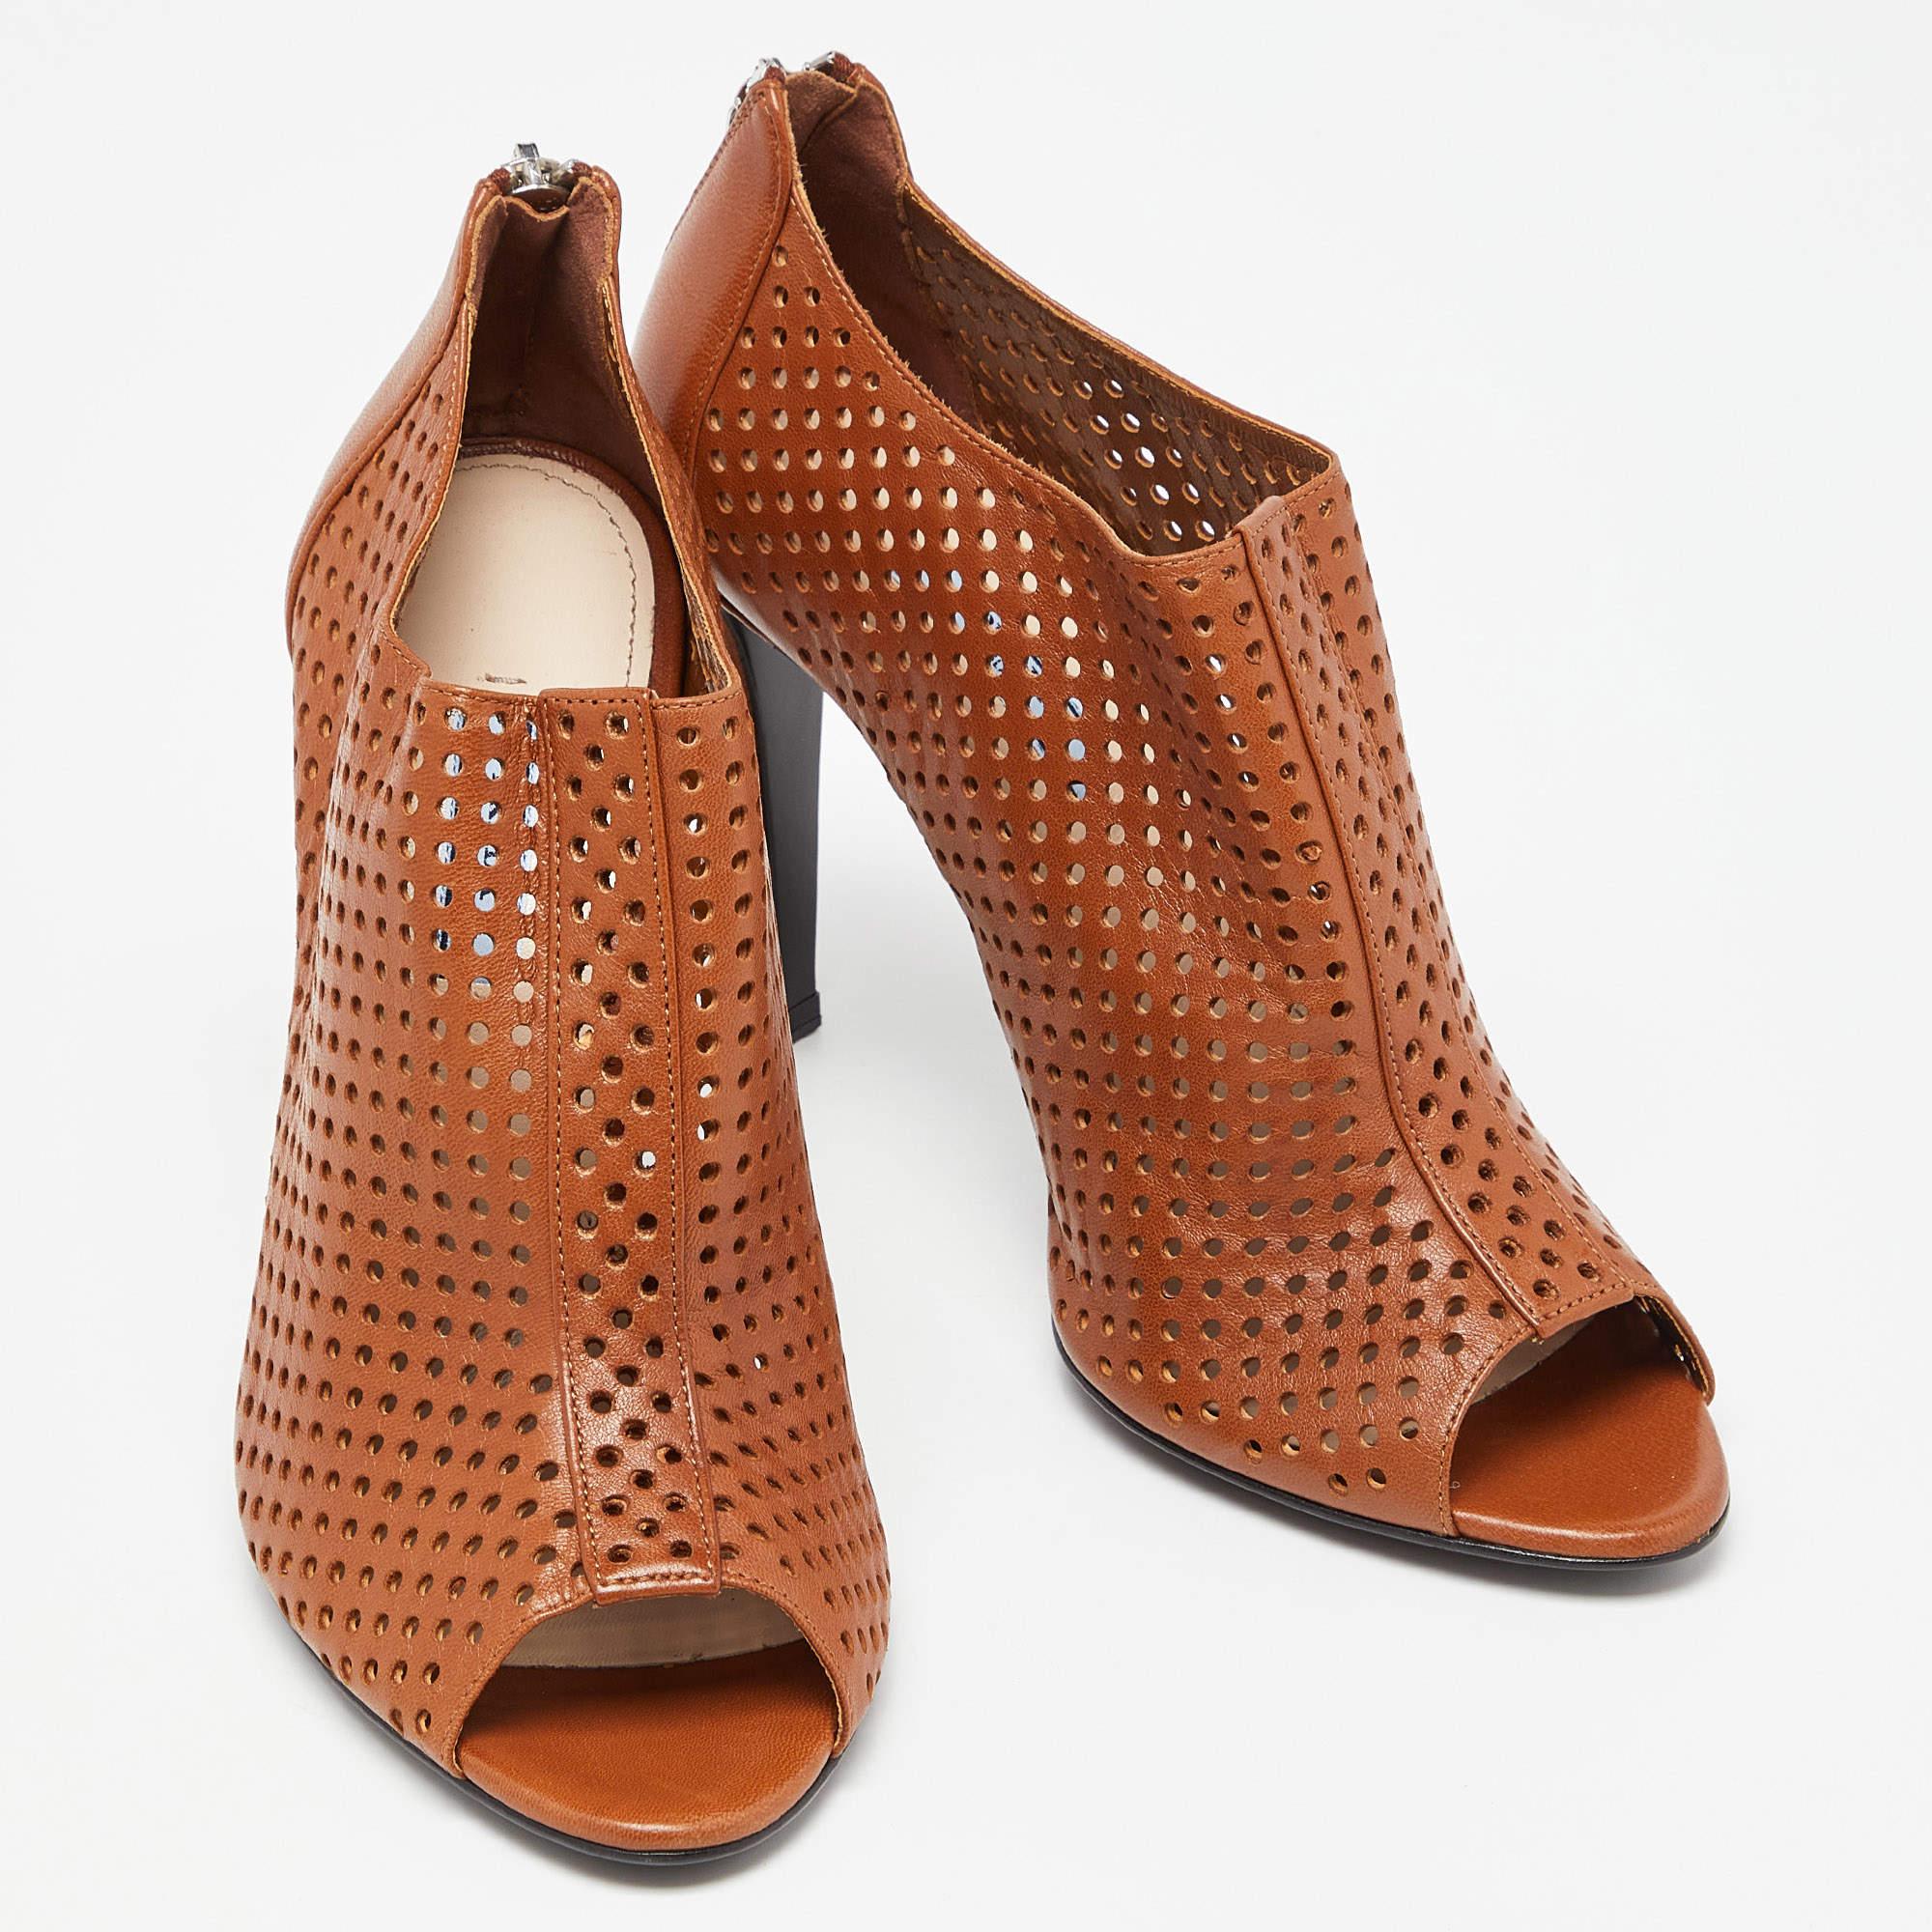 Women's Prada Brown Perforated Leather Peep Toe Ankle Booties Size 39